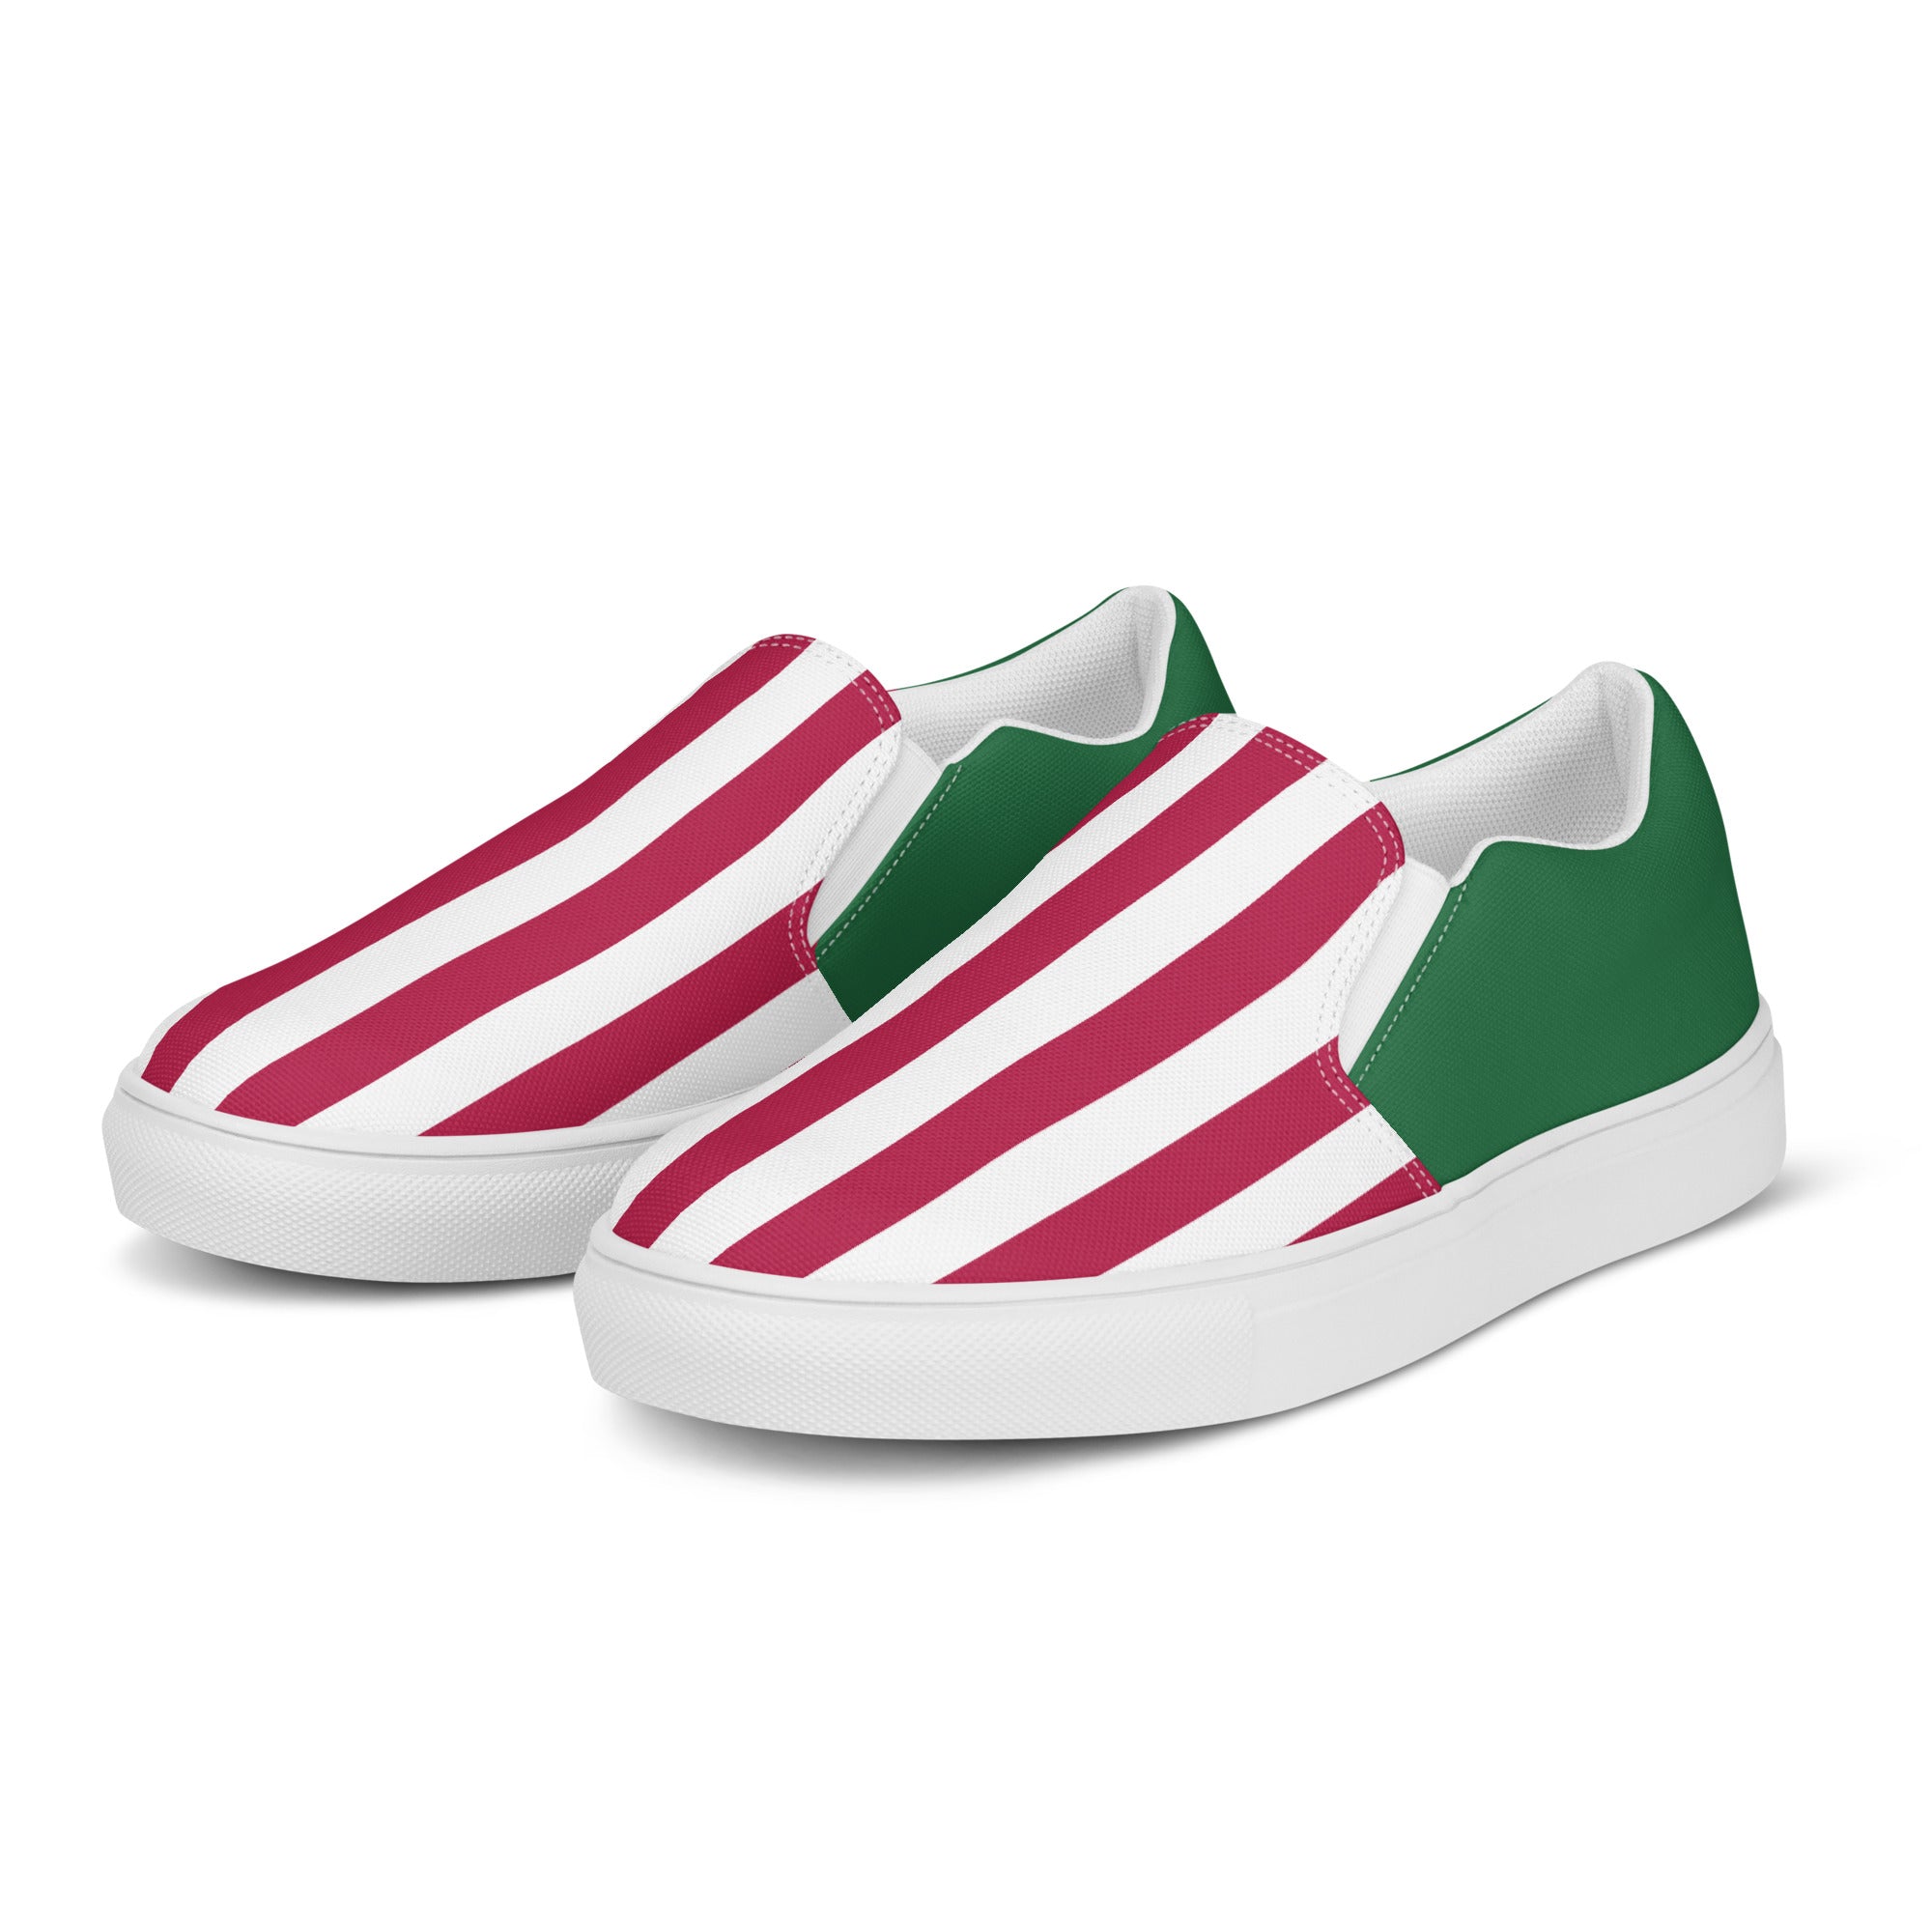 "The Ritas" Women’s Slip-on Canvas Shoes